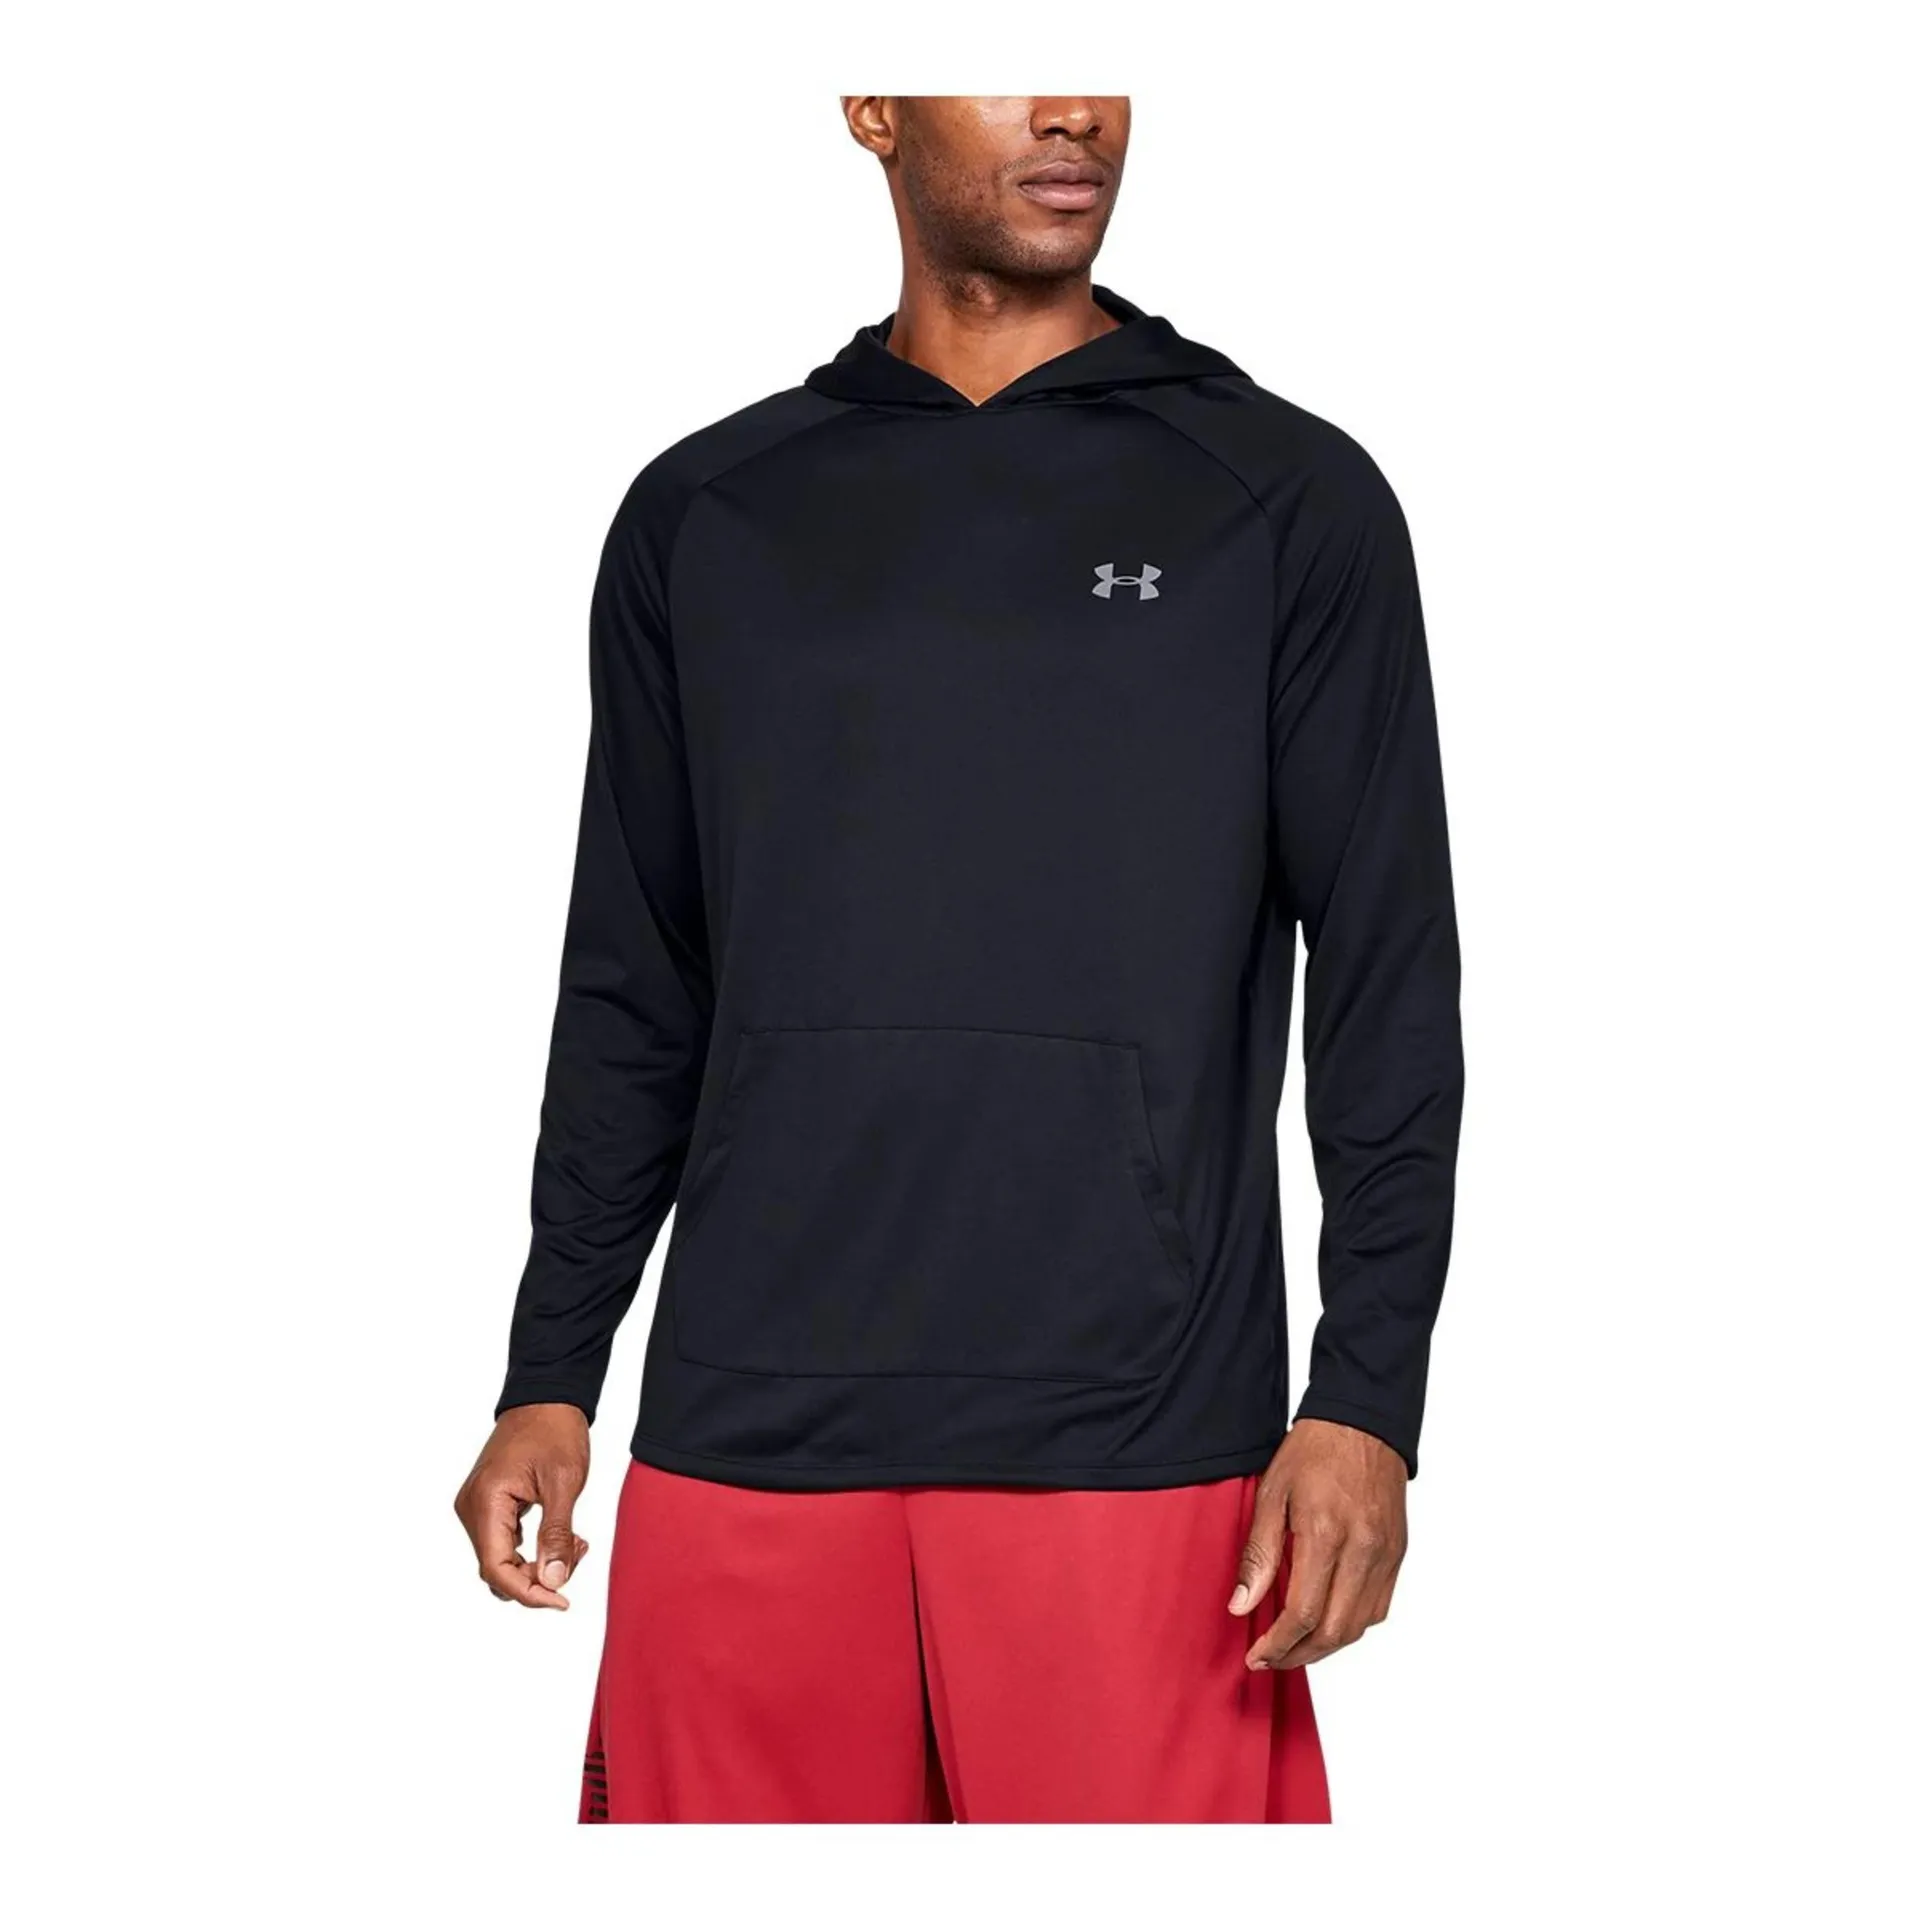 Under Armour Men's Tech 2.0 Training Hoodie, Quick-Dry